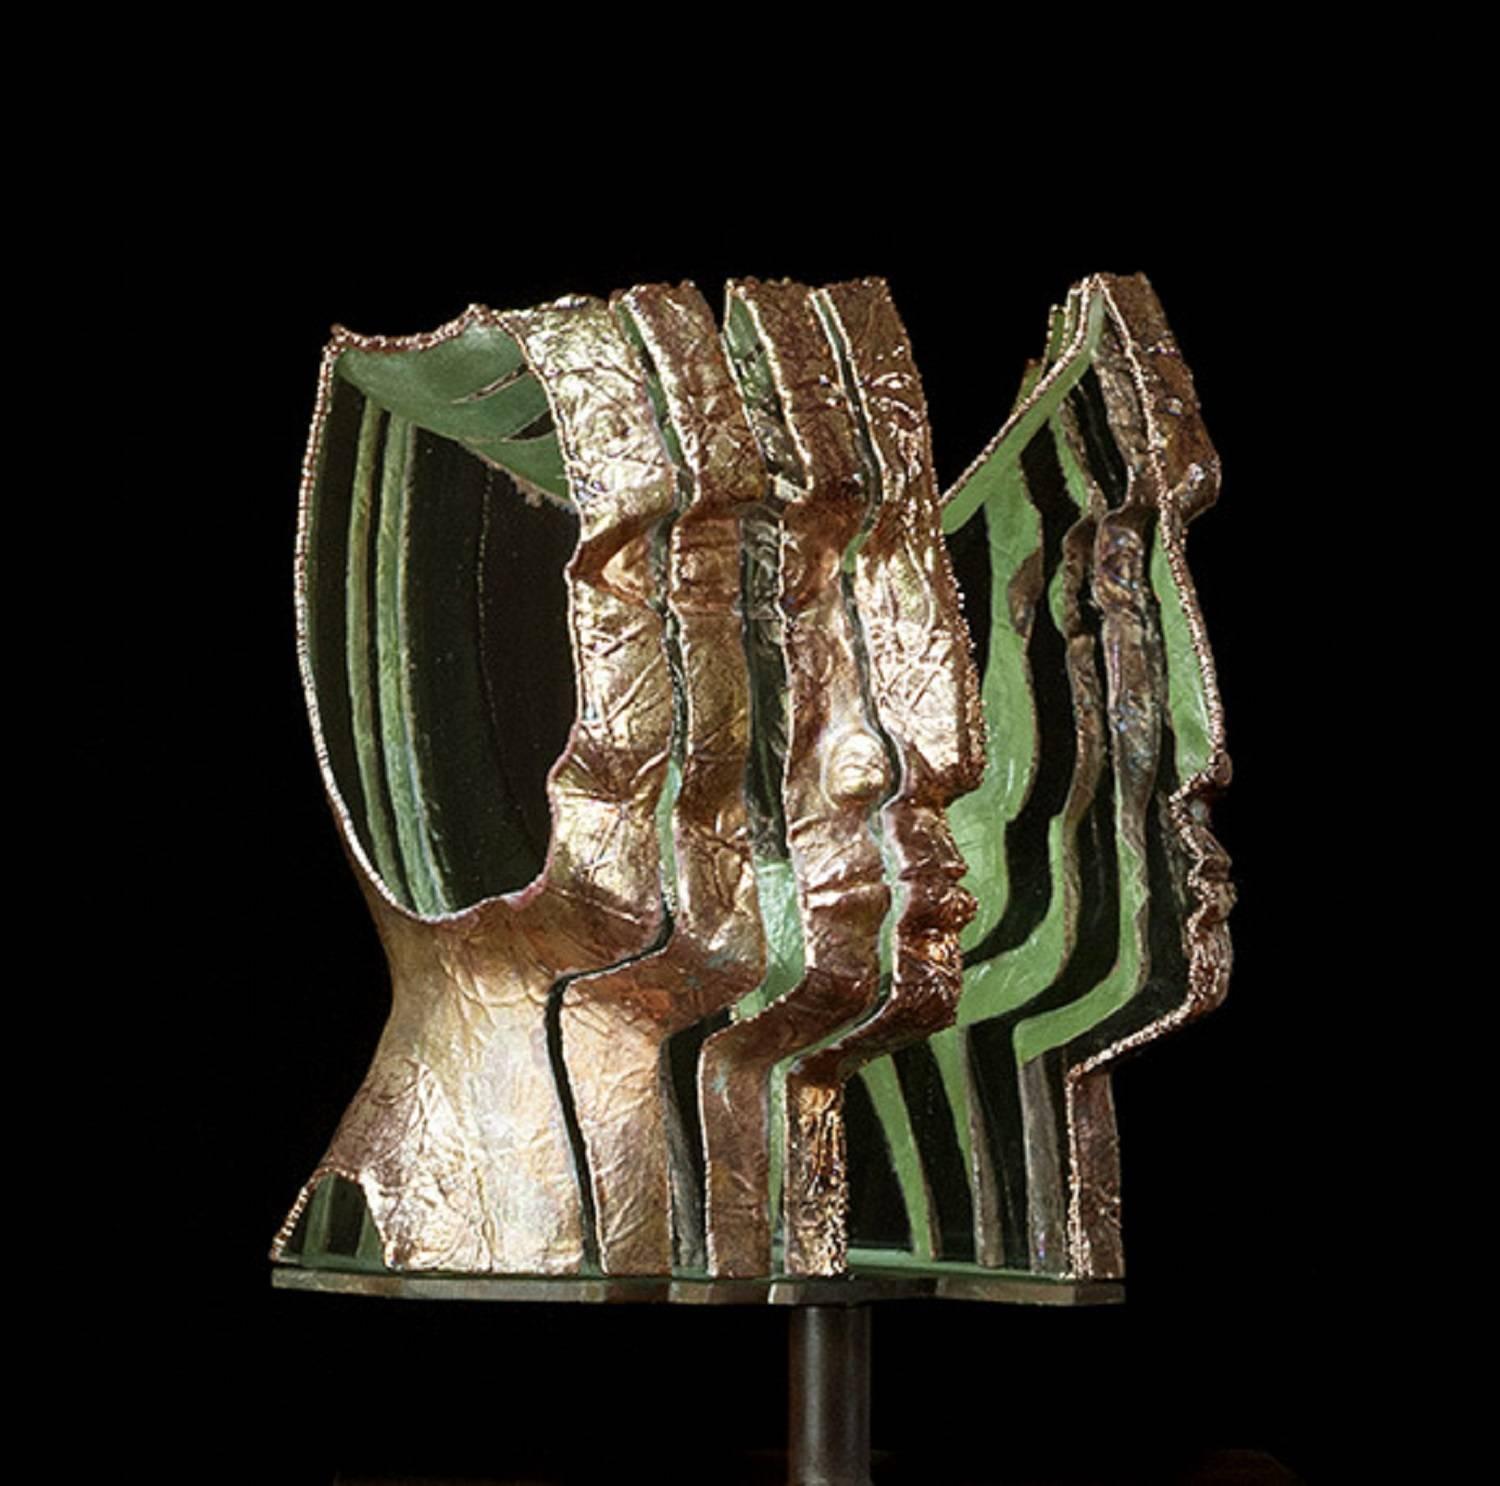 Louis Sclafani Figurative Sculpture - 'Loredano' Sculpted Glass, Gold and Silver Leaf, and Electroplated 